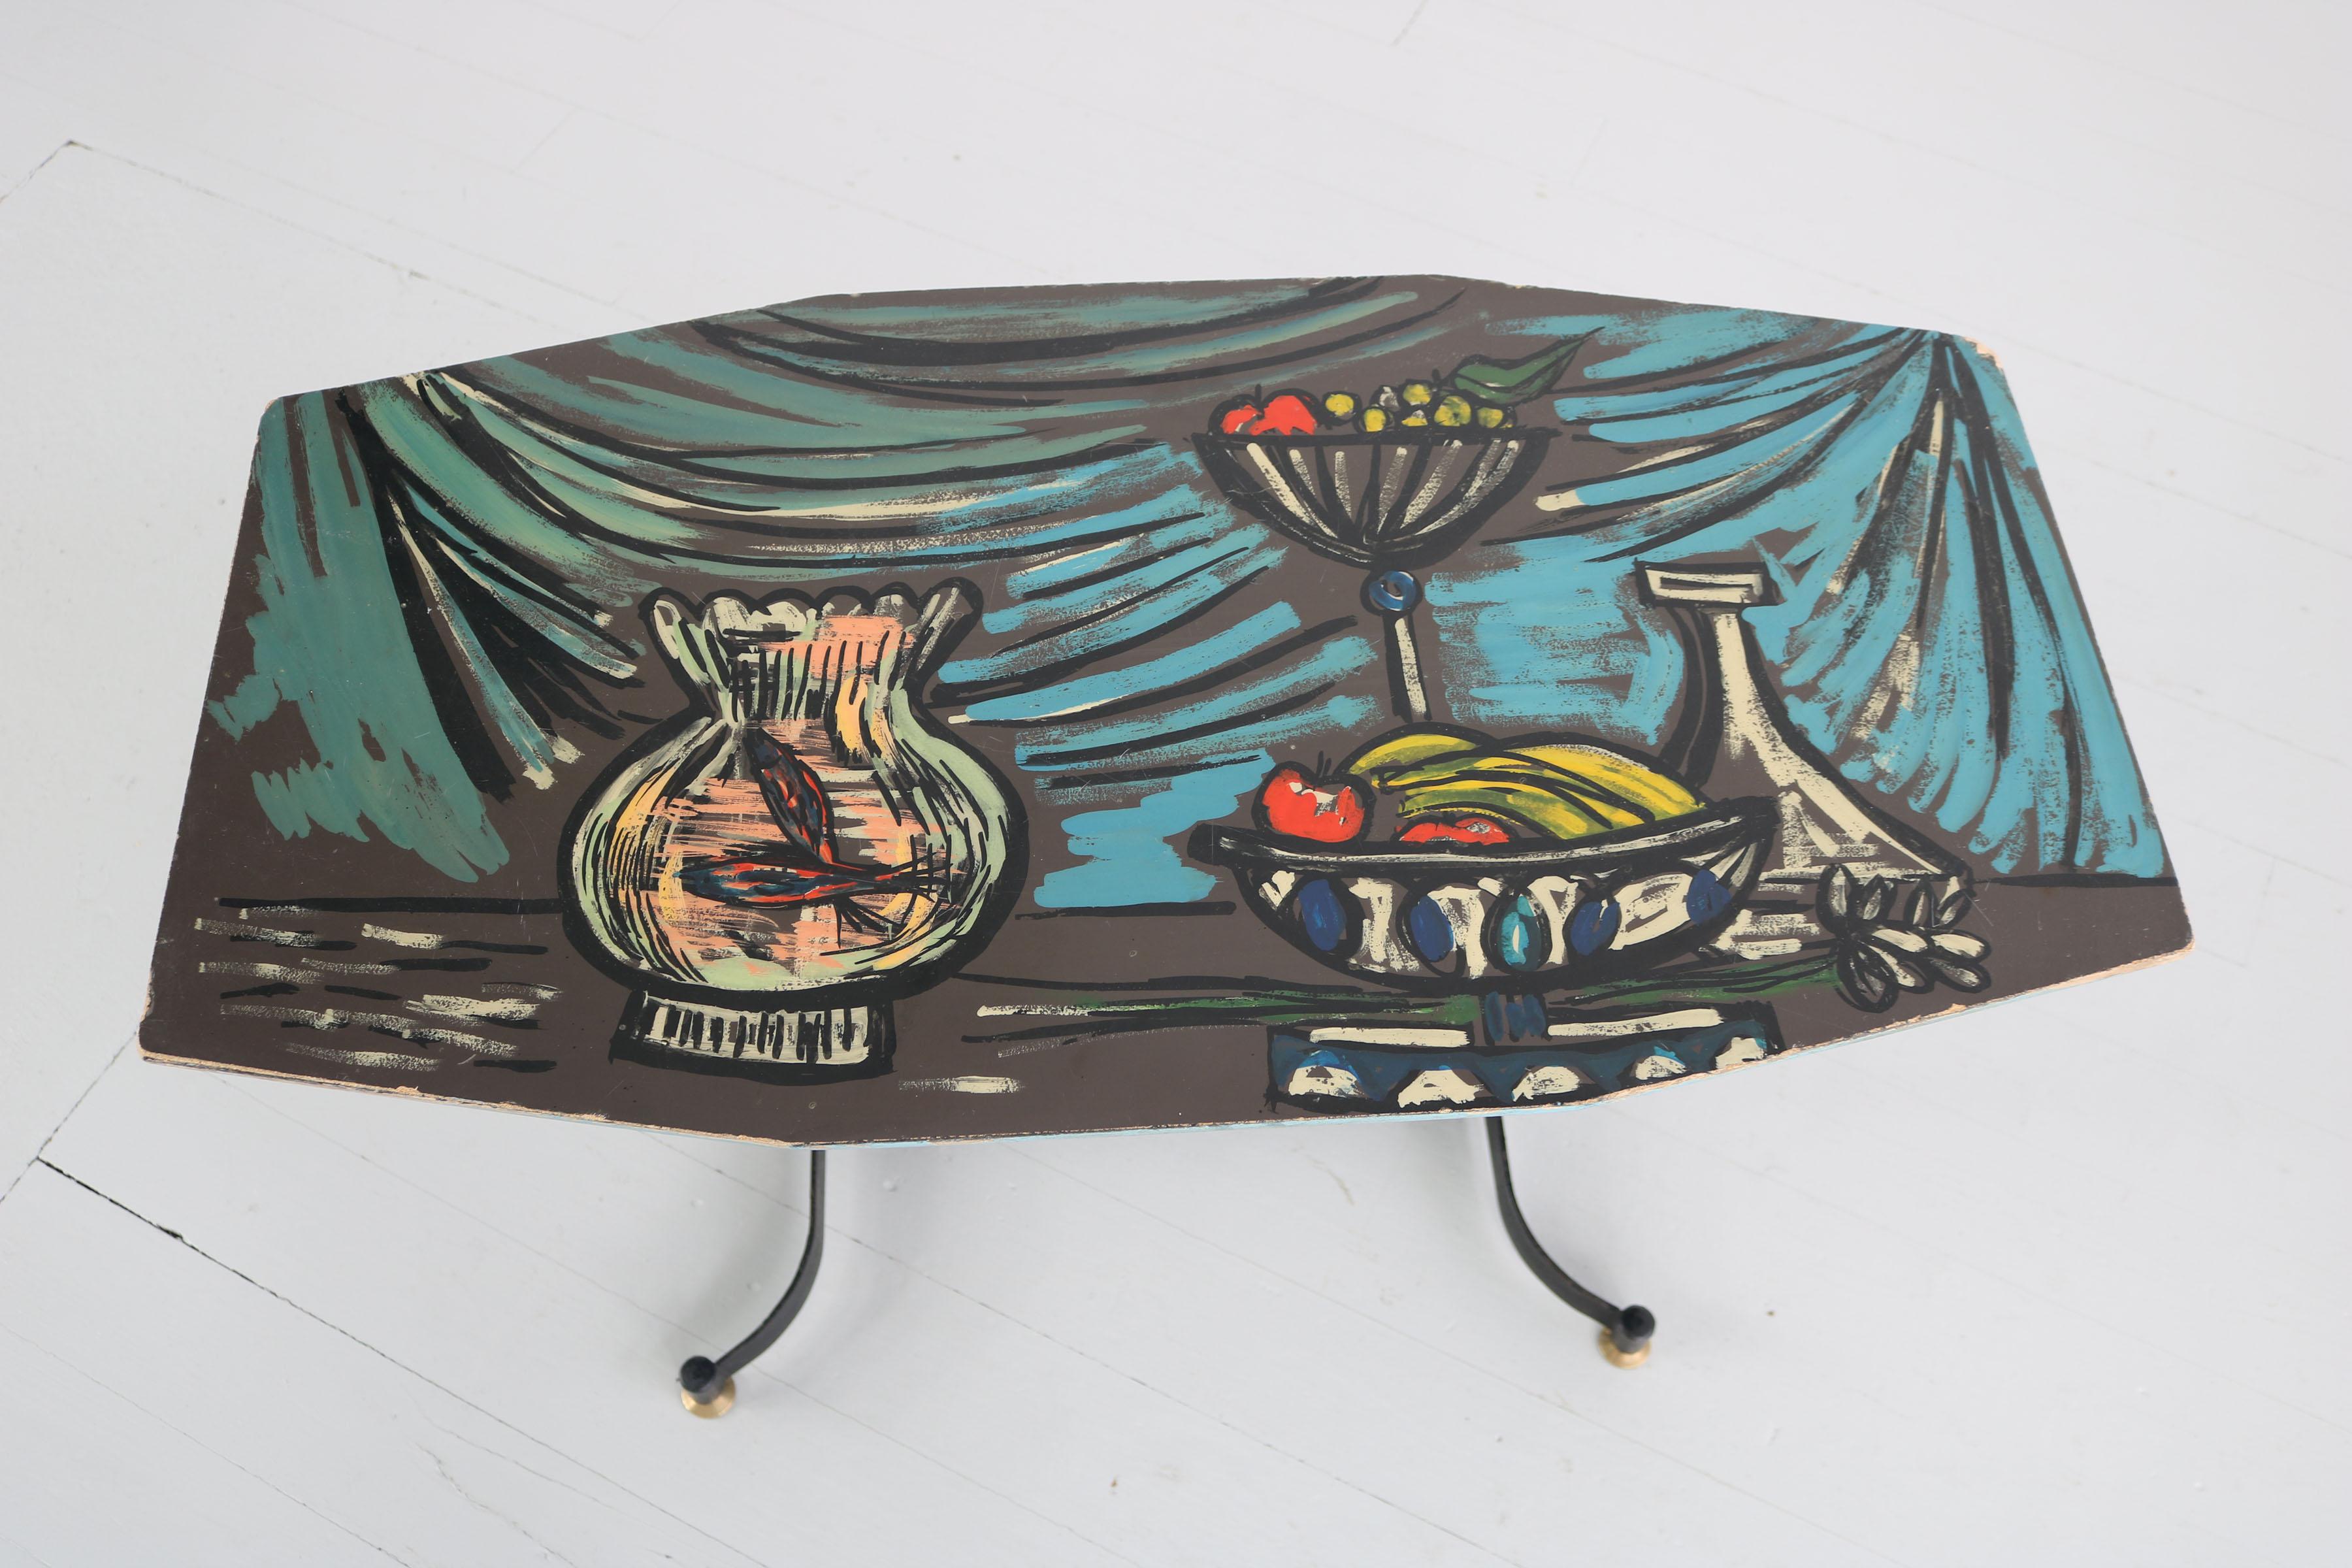 Metal Italian Dark Sofa Table with Colorful Hand-Painted Motives on Table Top, 1950s For Sale